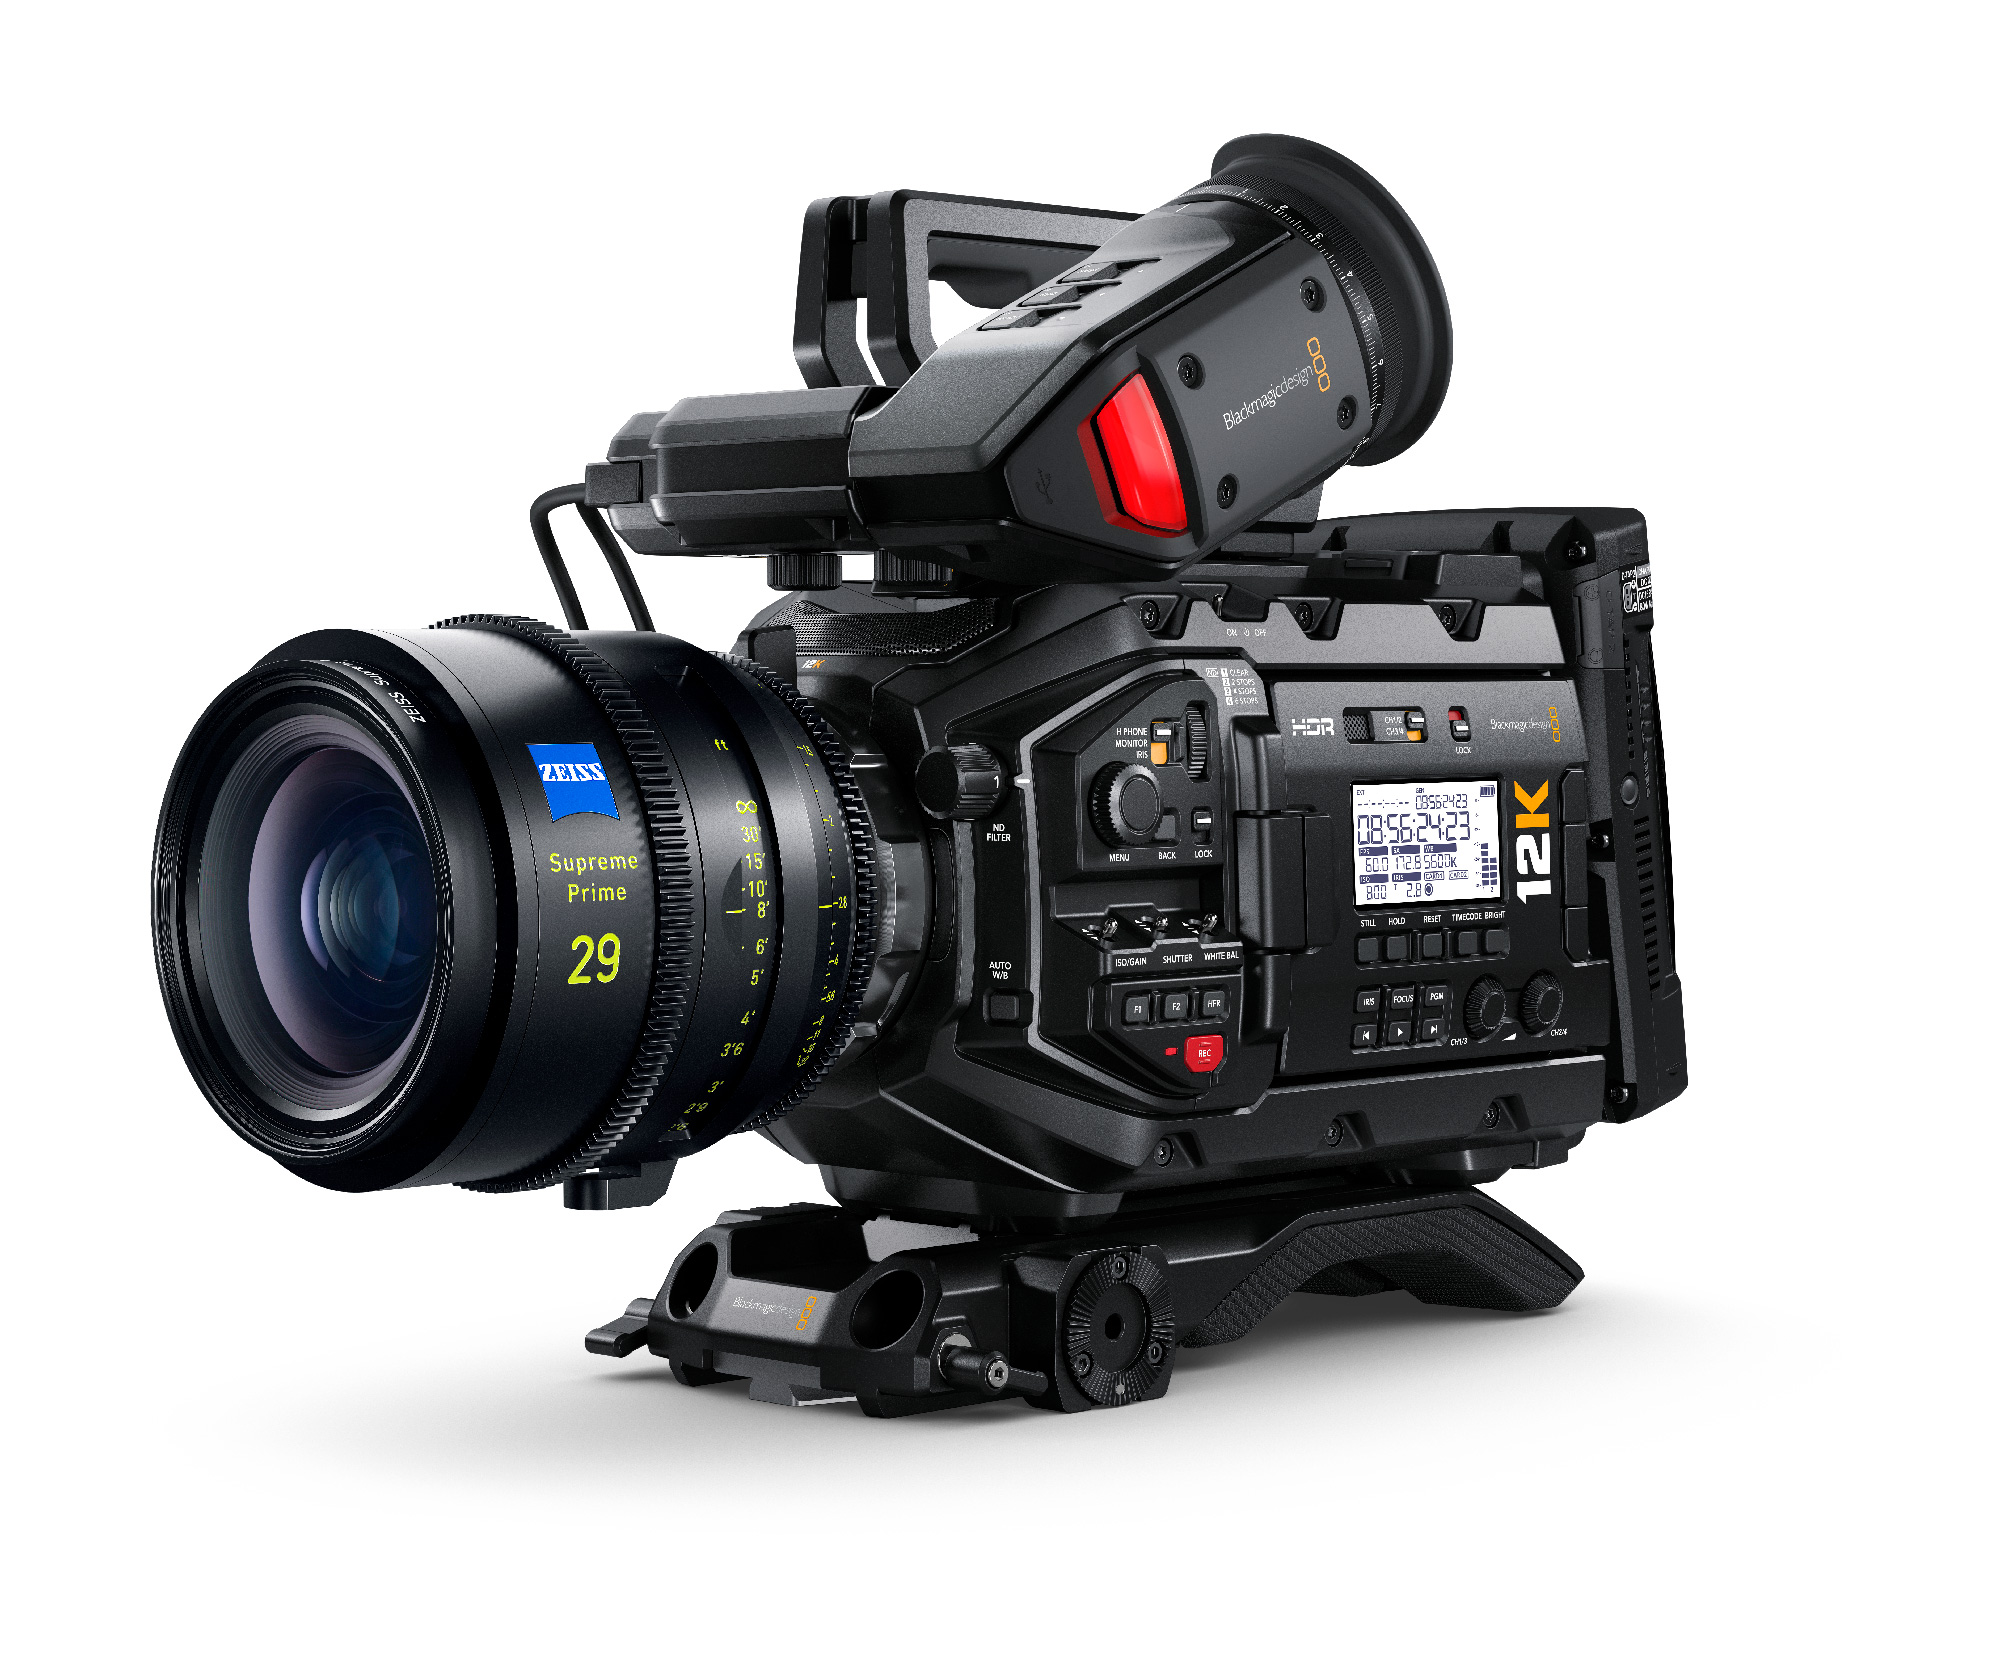 Blackmagic’s new camera shoots cinema-quality 12K footage for just $9,995